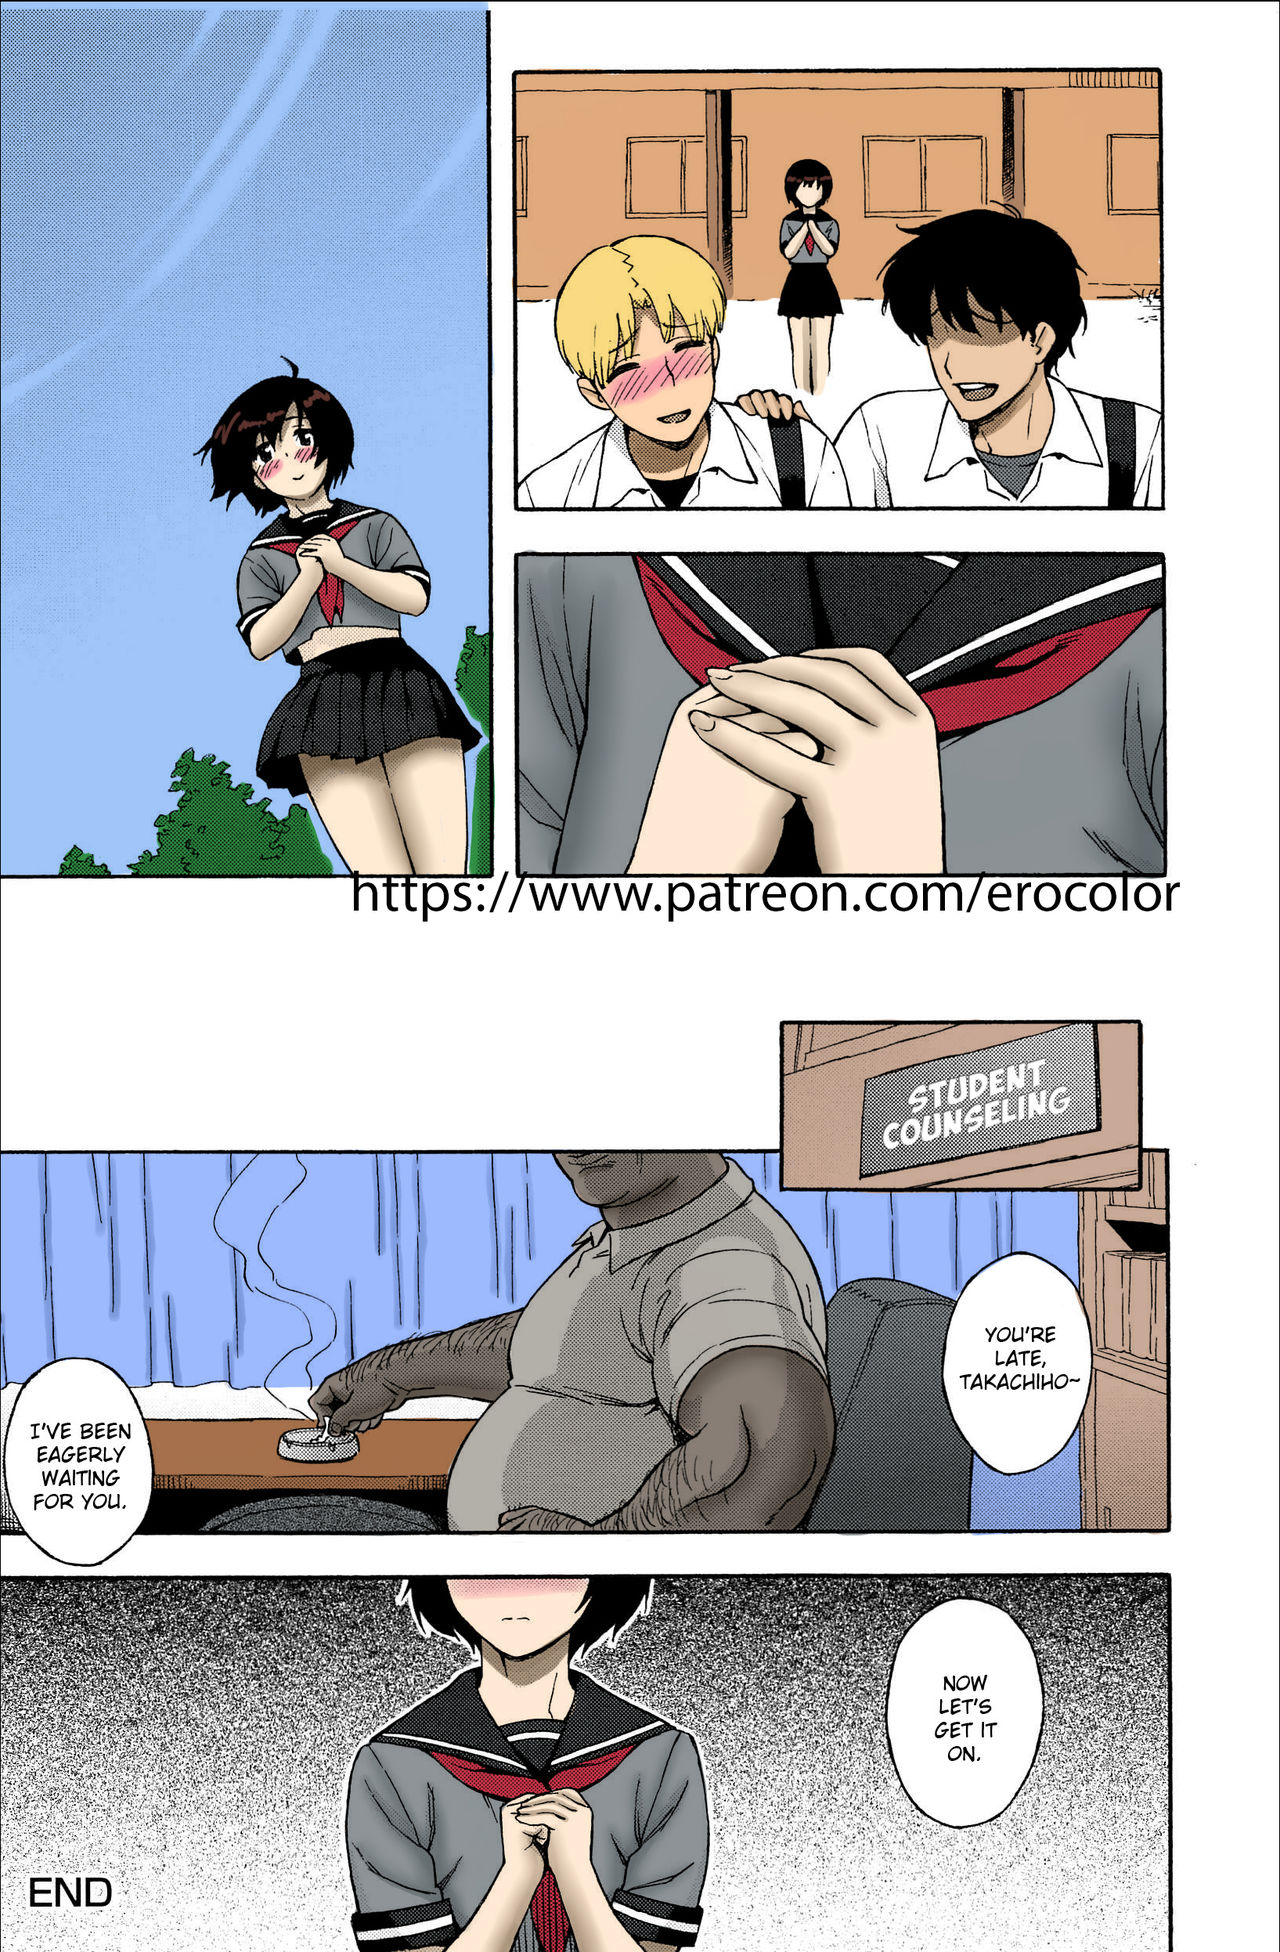 [Jingrock] Love Letter [Ongoing][English][Colorized][Erocolor] page 5 full